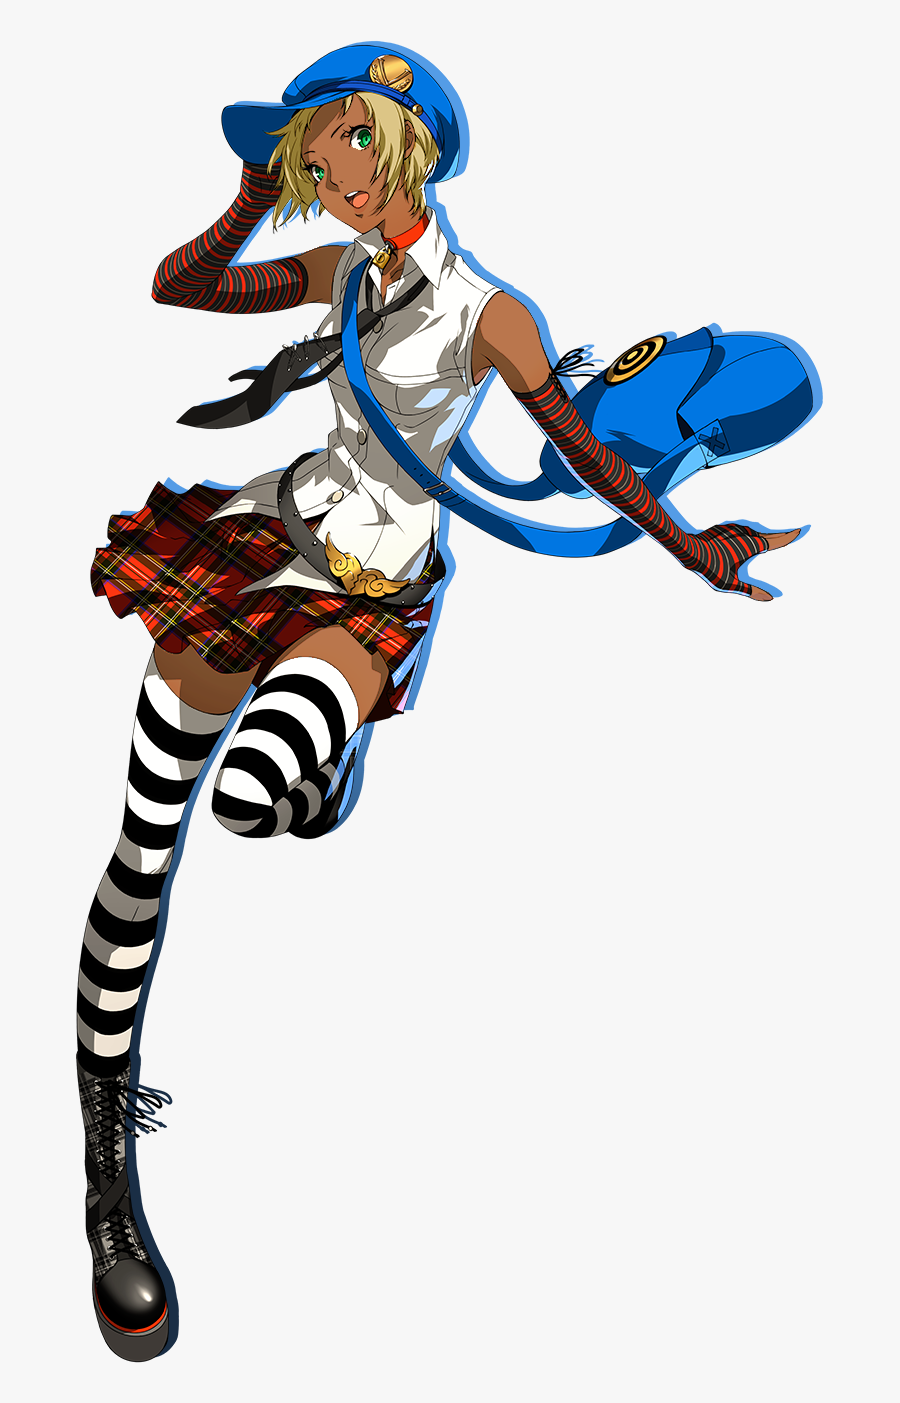 Just Click At Your Own Risk - Persona 4 Shadow Marie, Transparent Clipart